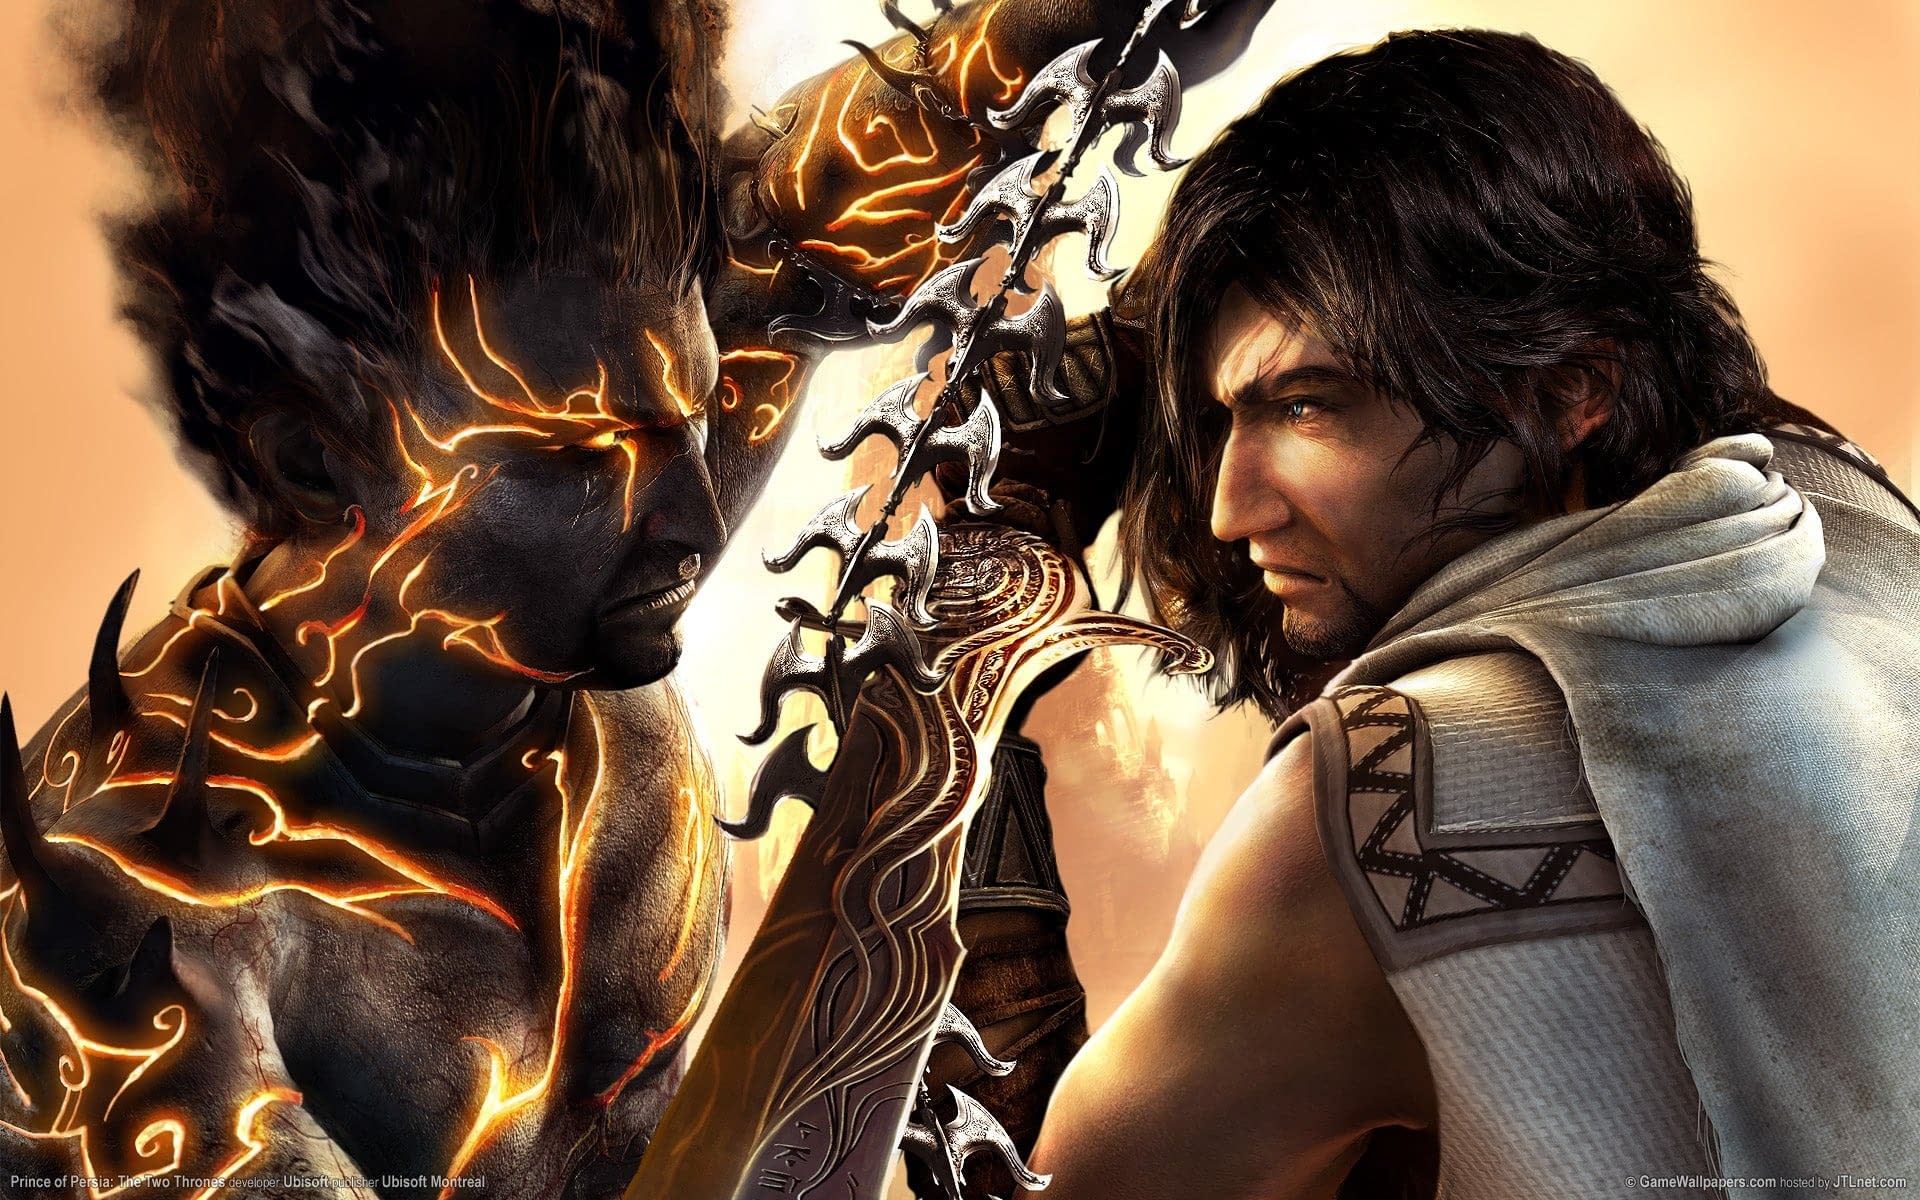 Prince of Persia: The Two released mode to fix camera problems for Thrones